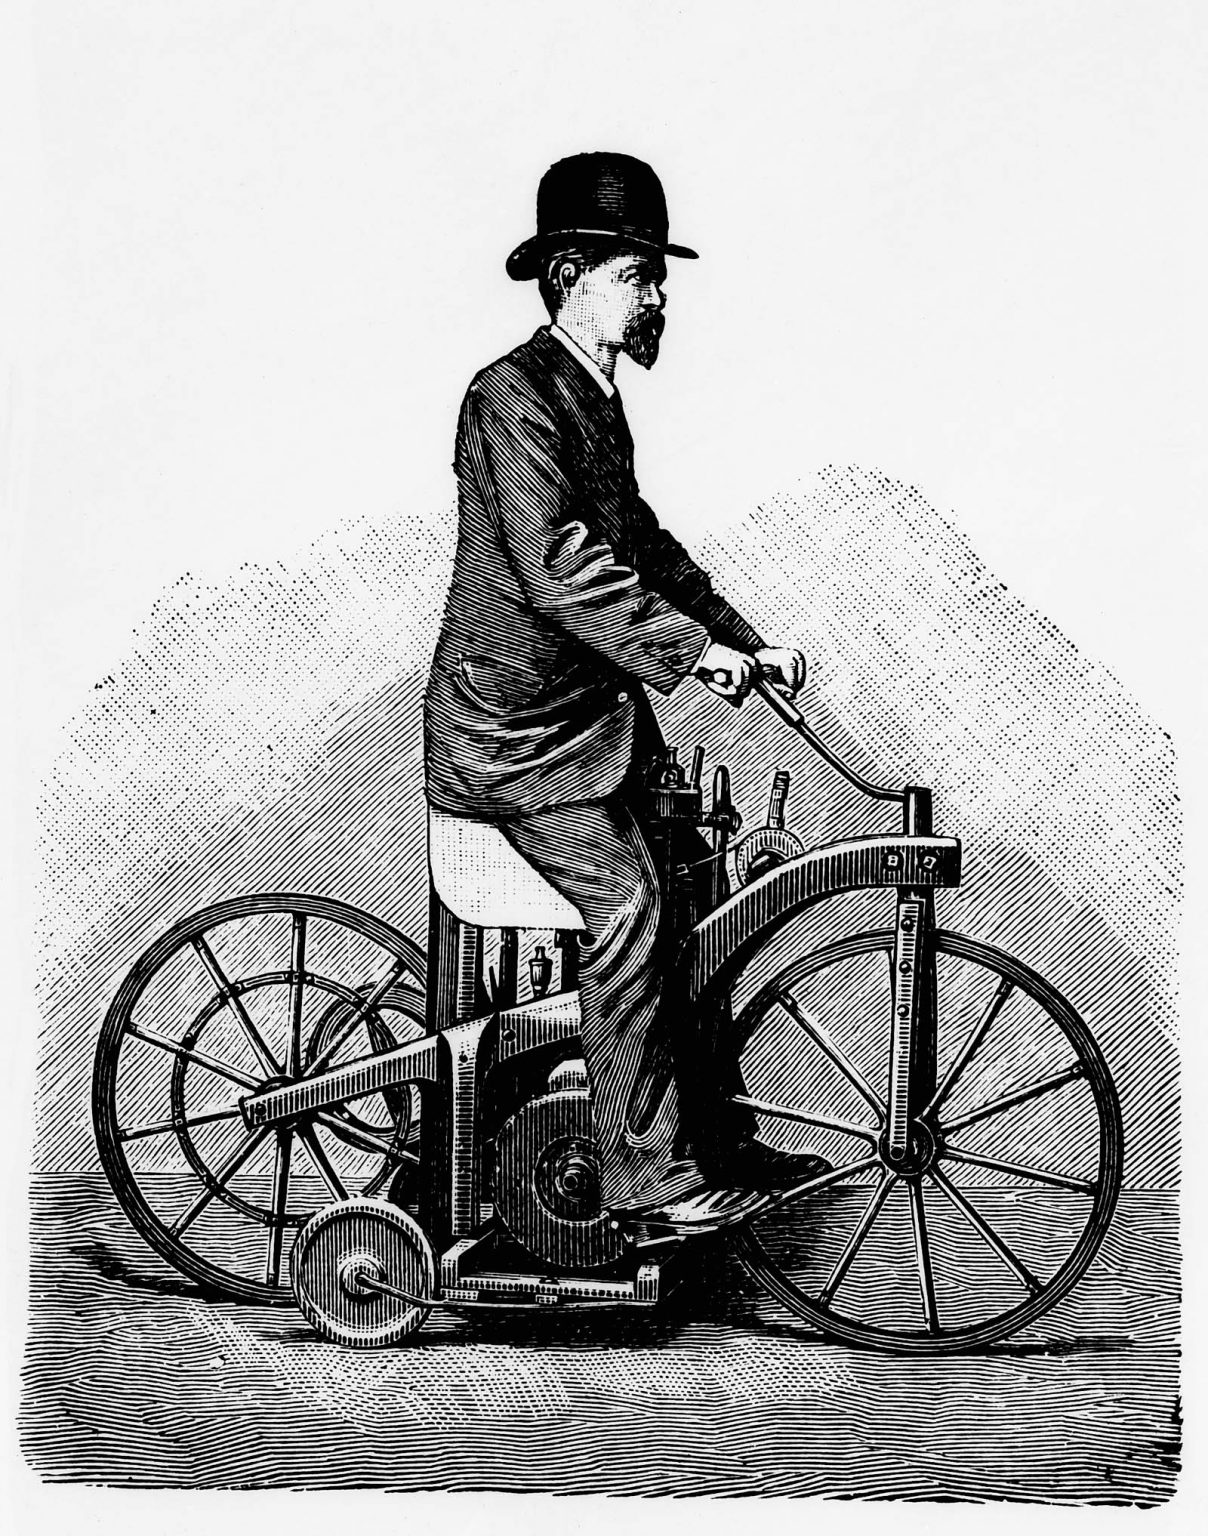 Wilhelm Maybach on the Reitwagen, the first motorcycle